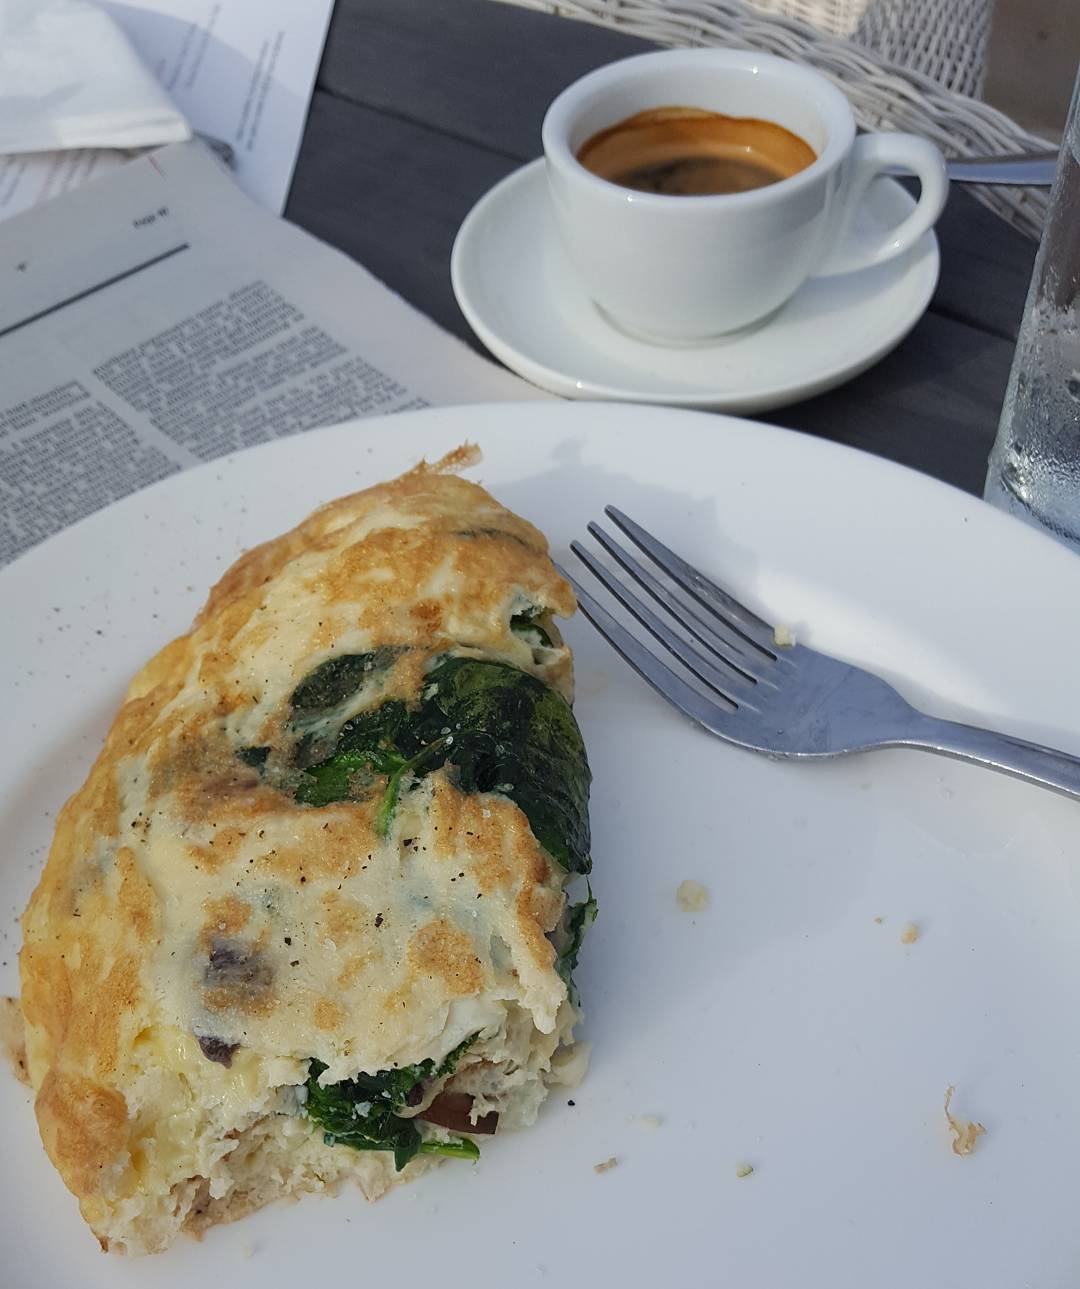 Healthy low carb and protein breakfast post-exercise workout

Omelette with cheese, spinach and mushroom and an expresso coffee.